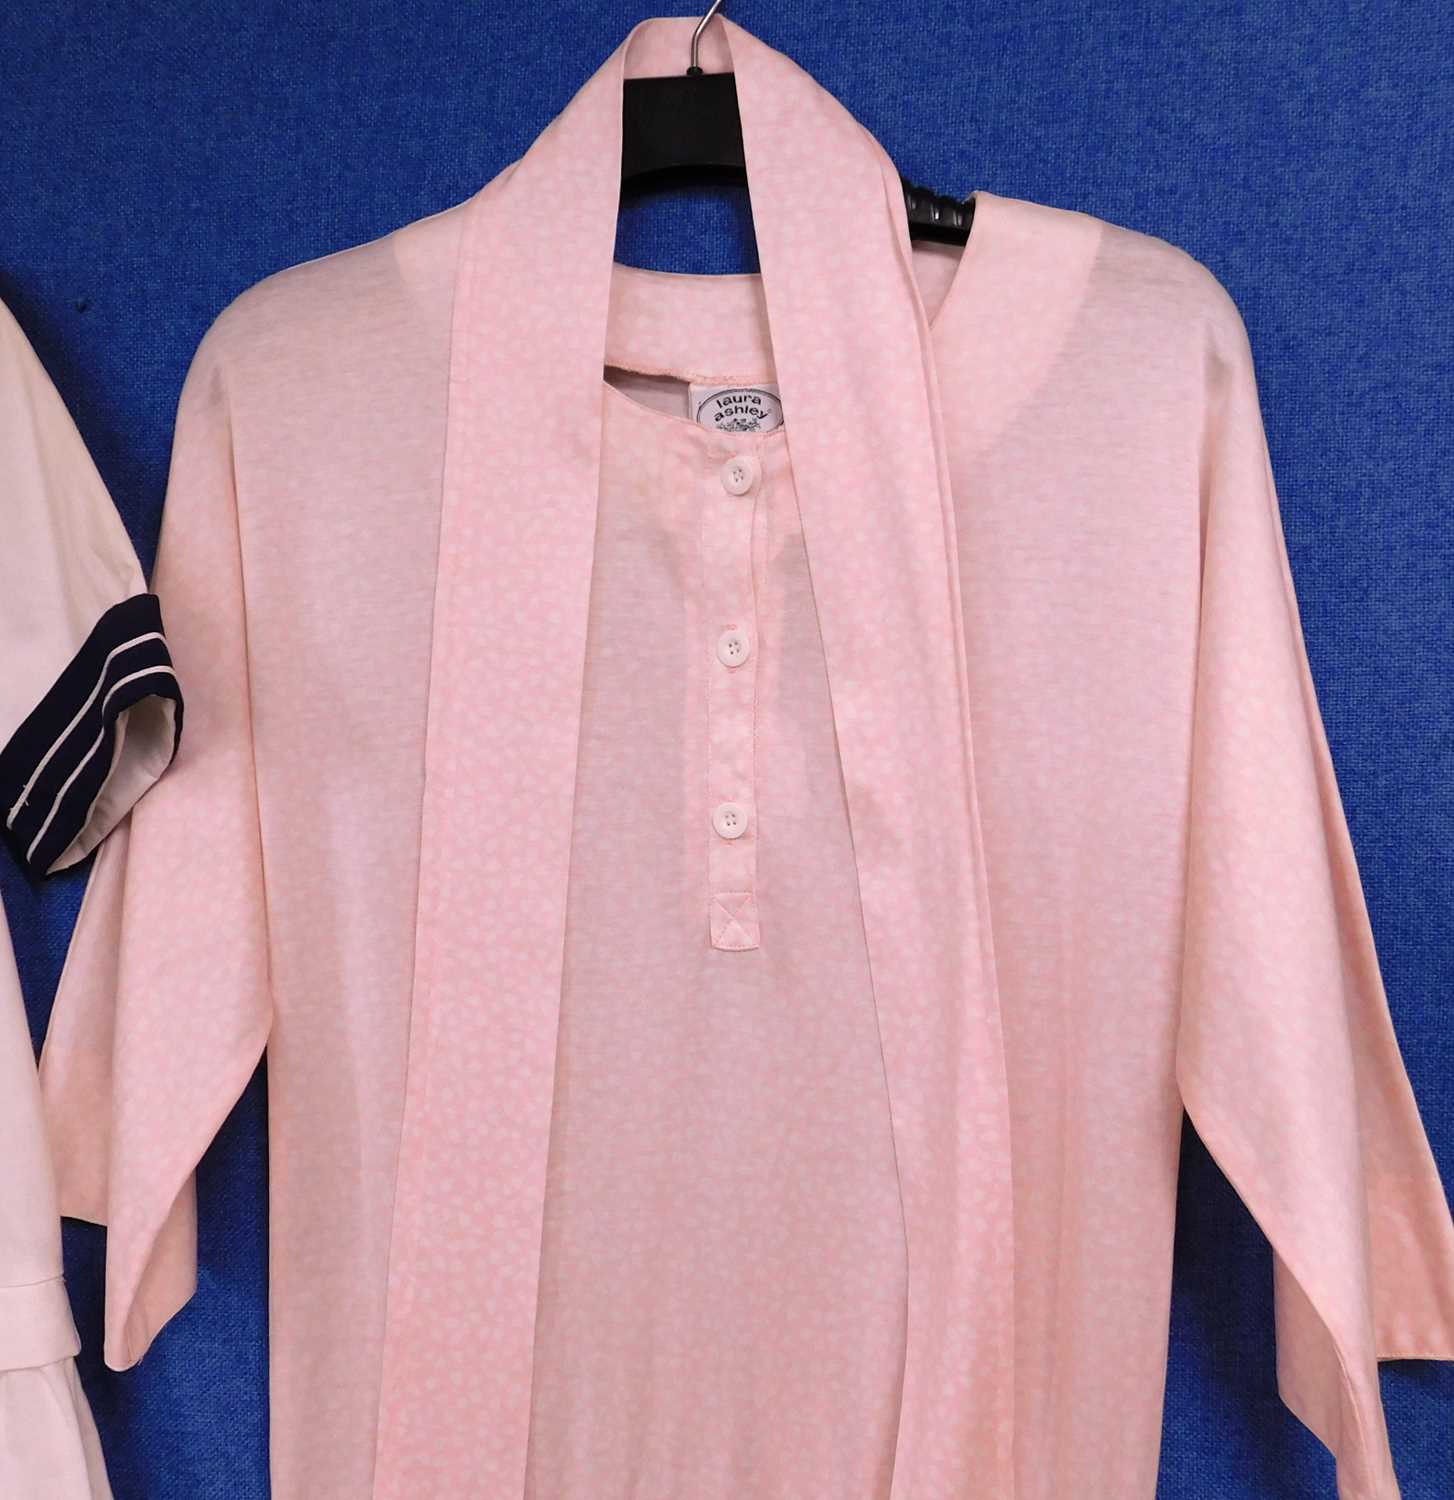 Two Laura Ashley dresses to include a cream and navy blue sailor dress and a pink and white - Image 3 of 9